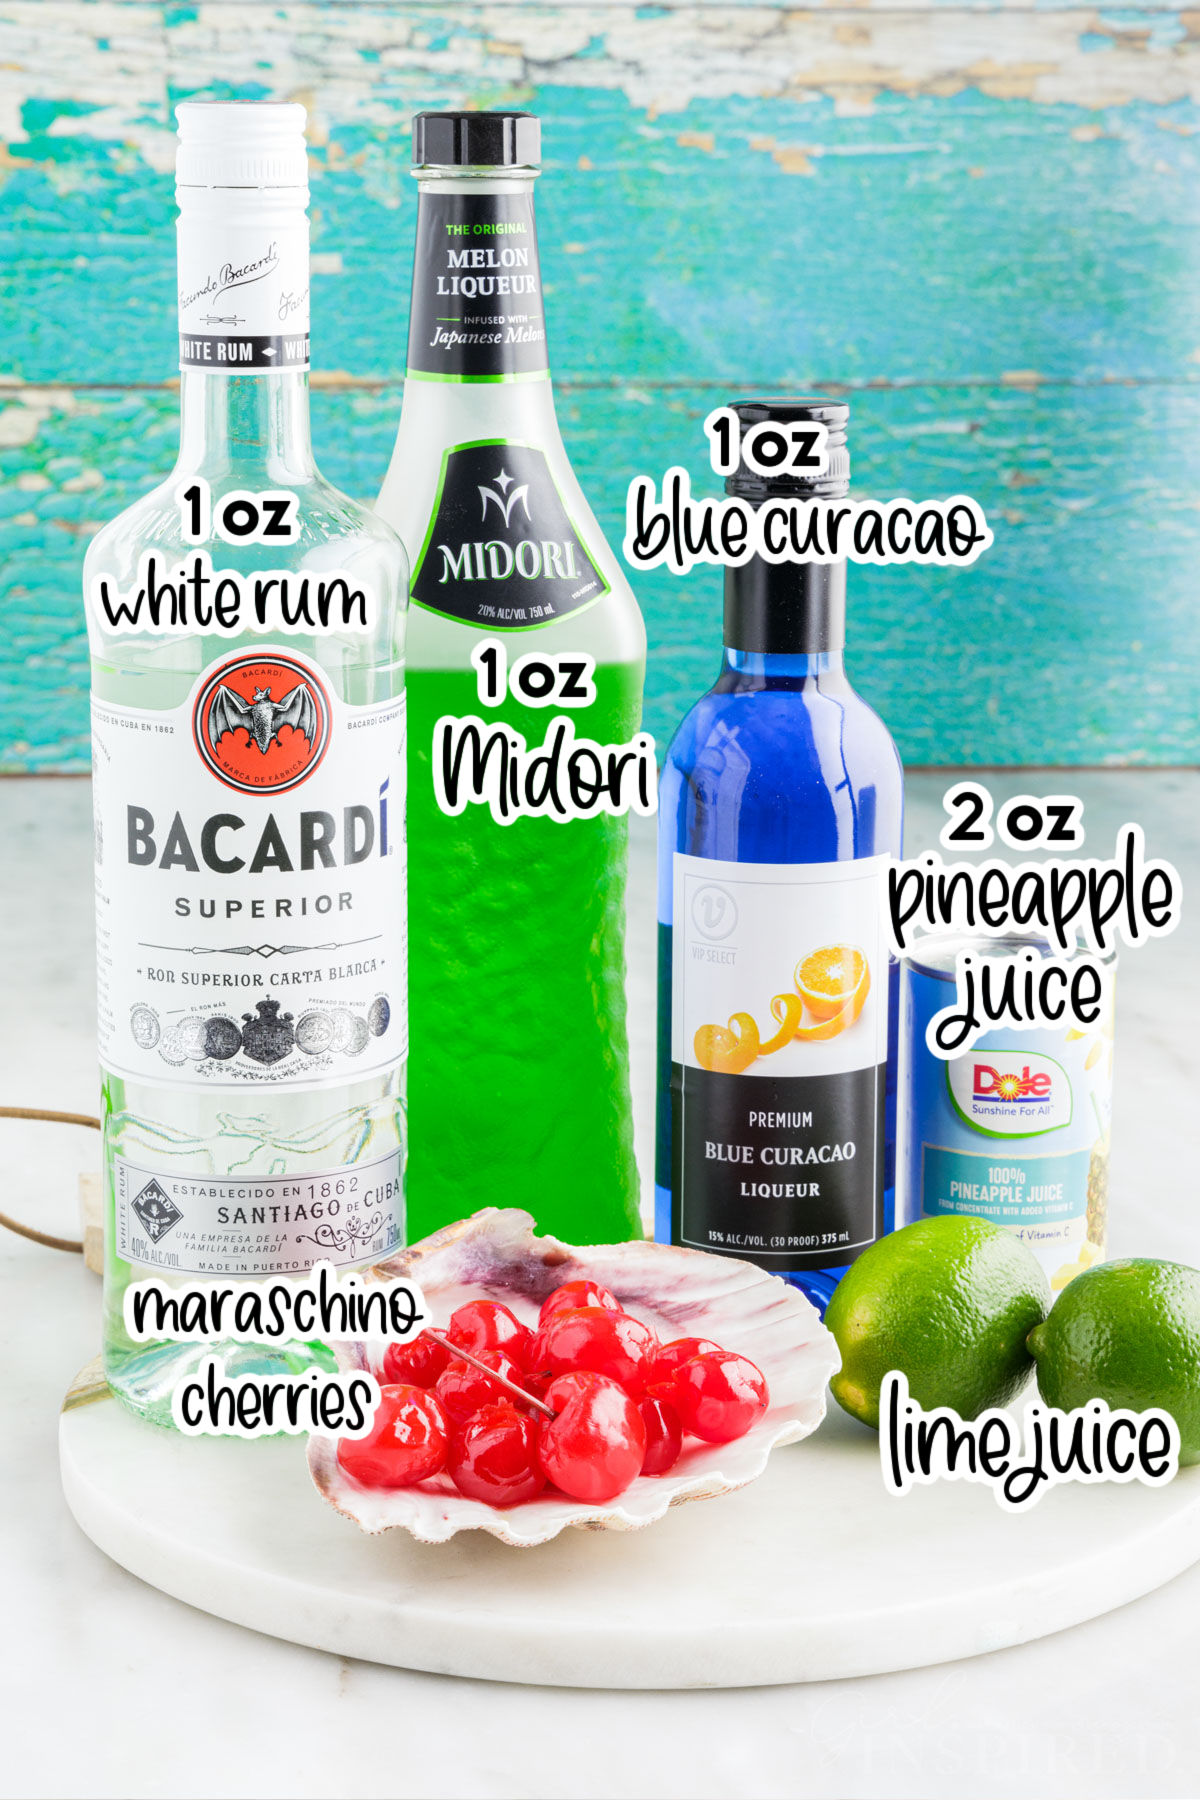 Ingredients to make a tipsy mermaid drink including a bottle of Bacardi rum, Midori, blue curacao, a can of pineapple juice, dish of maraschino cherries, and two limes.